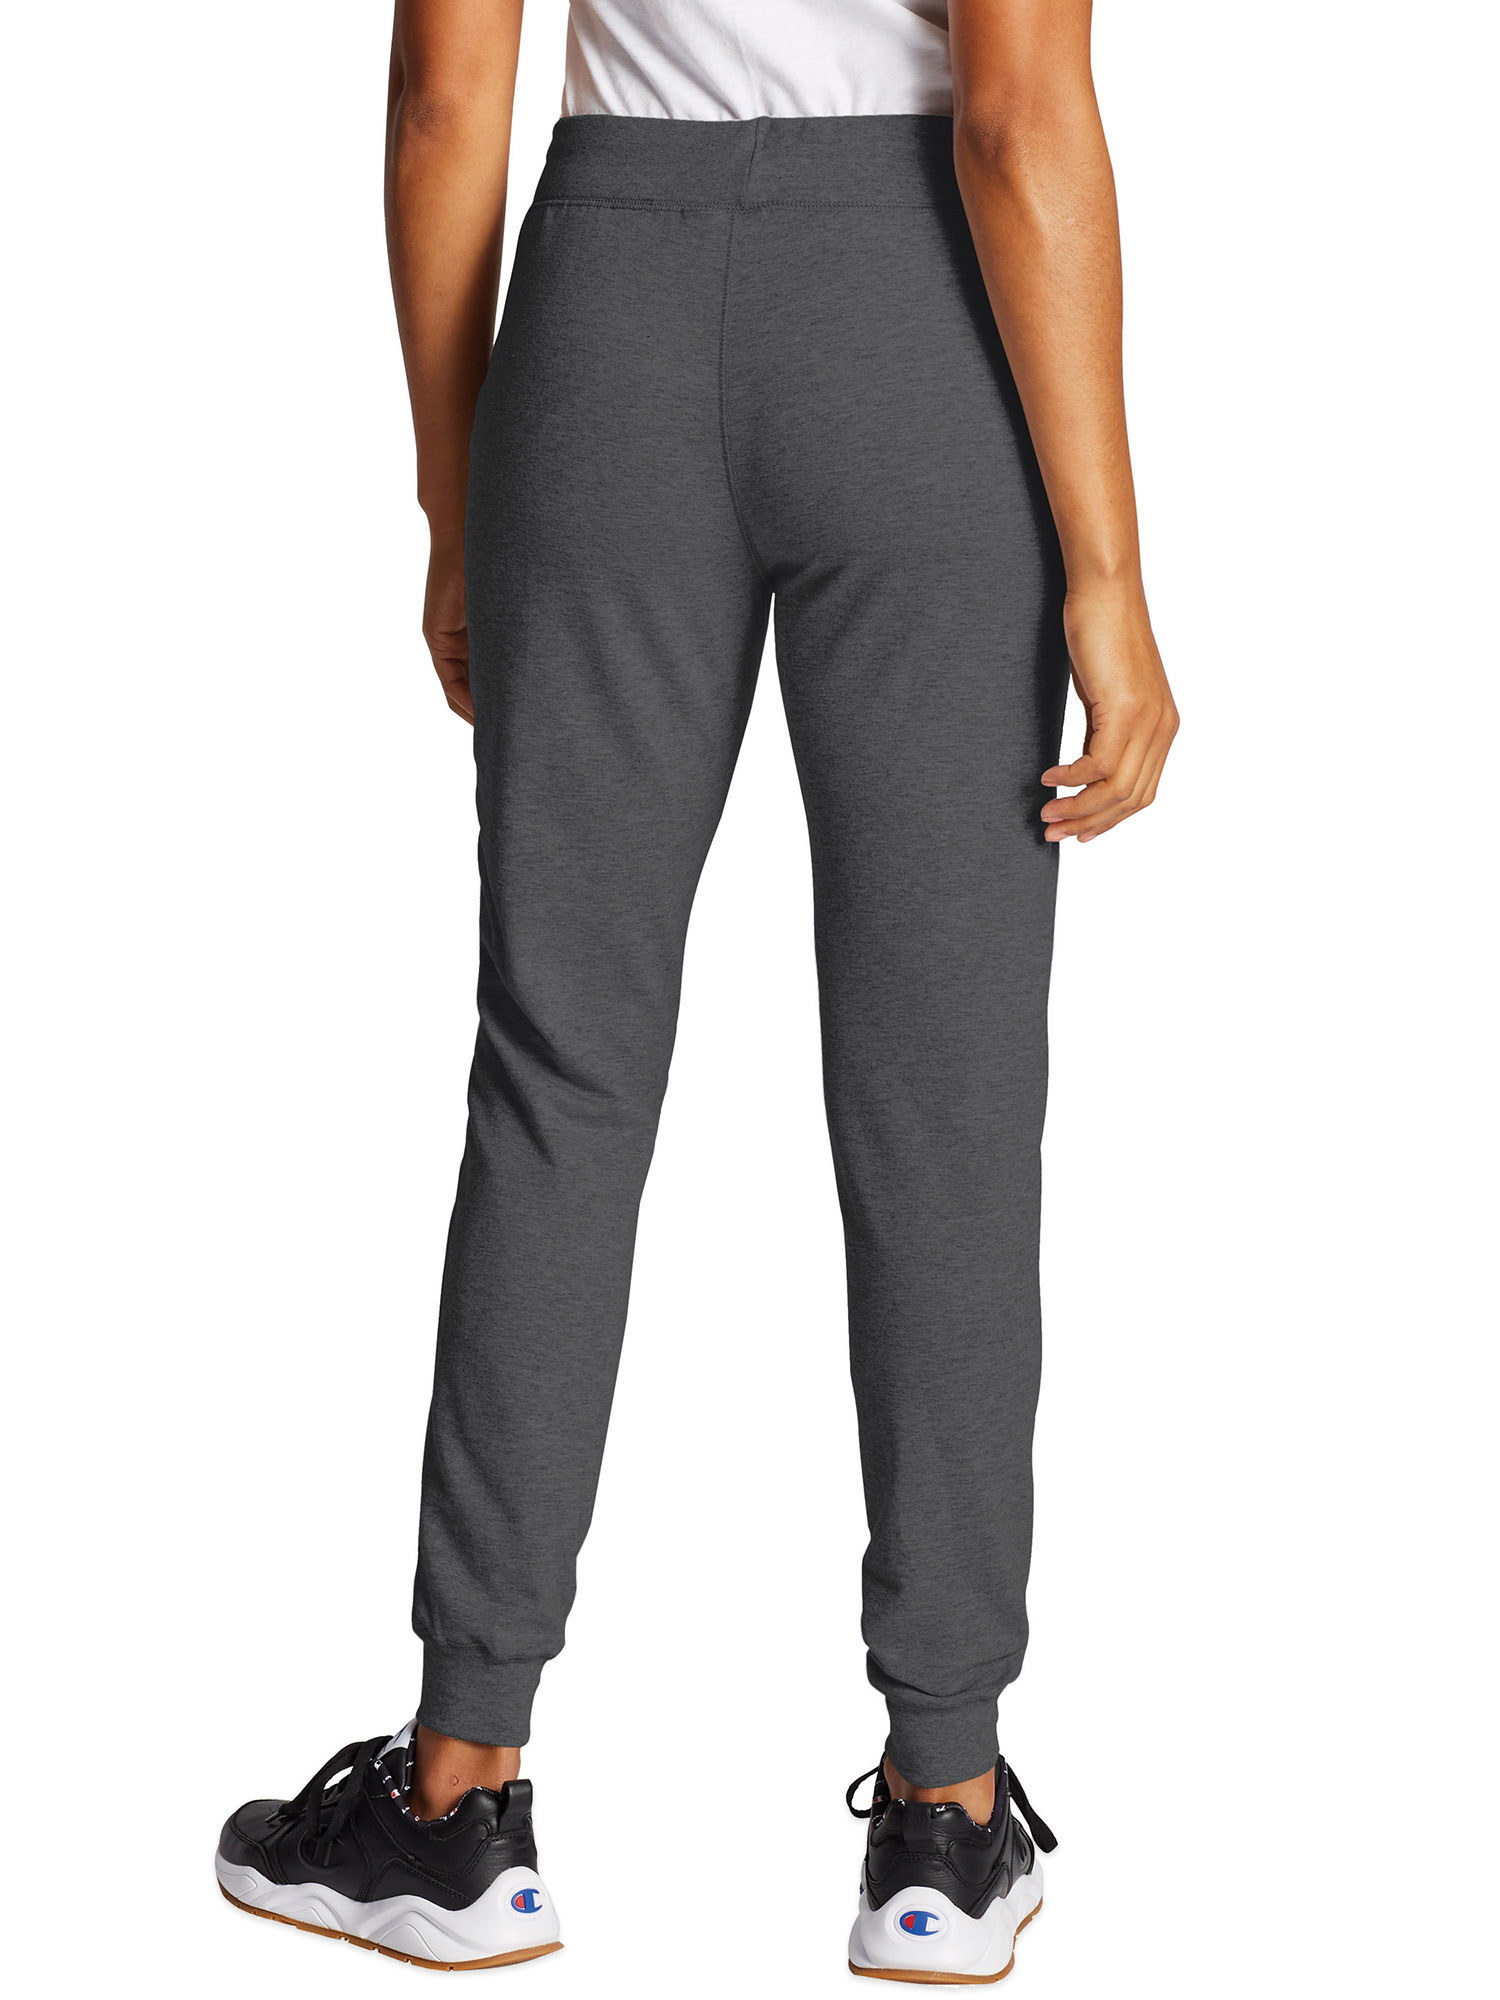 Champion Women`s French Terry Jogger Pants - image 3 of 5